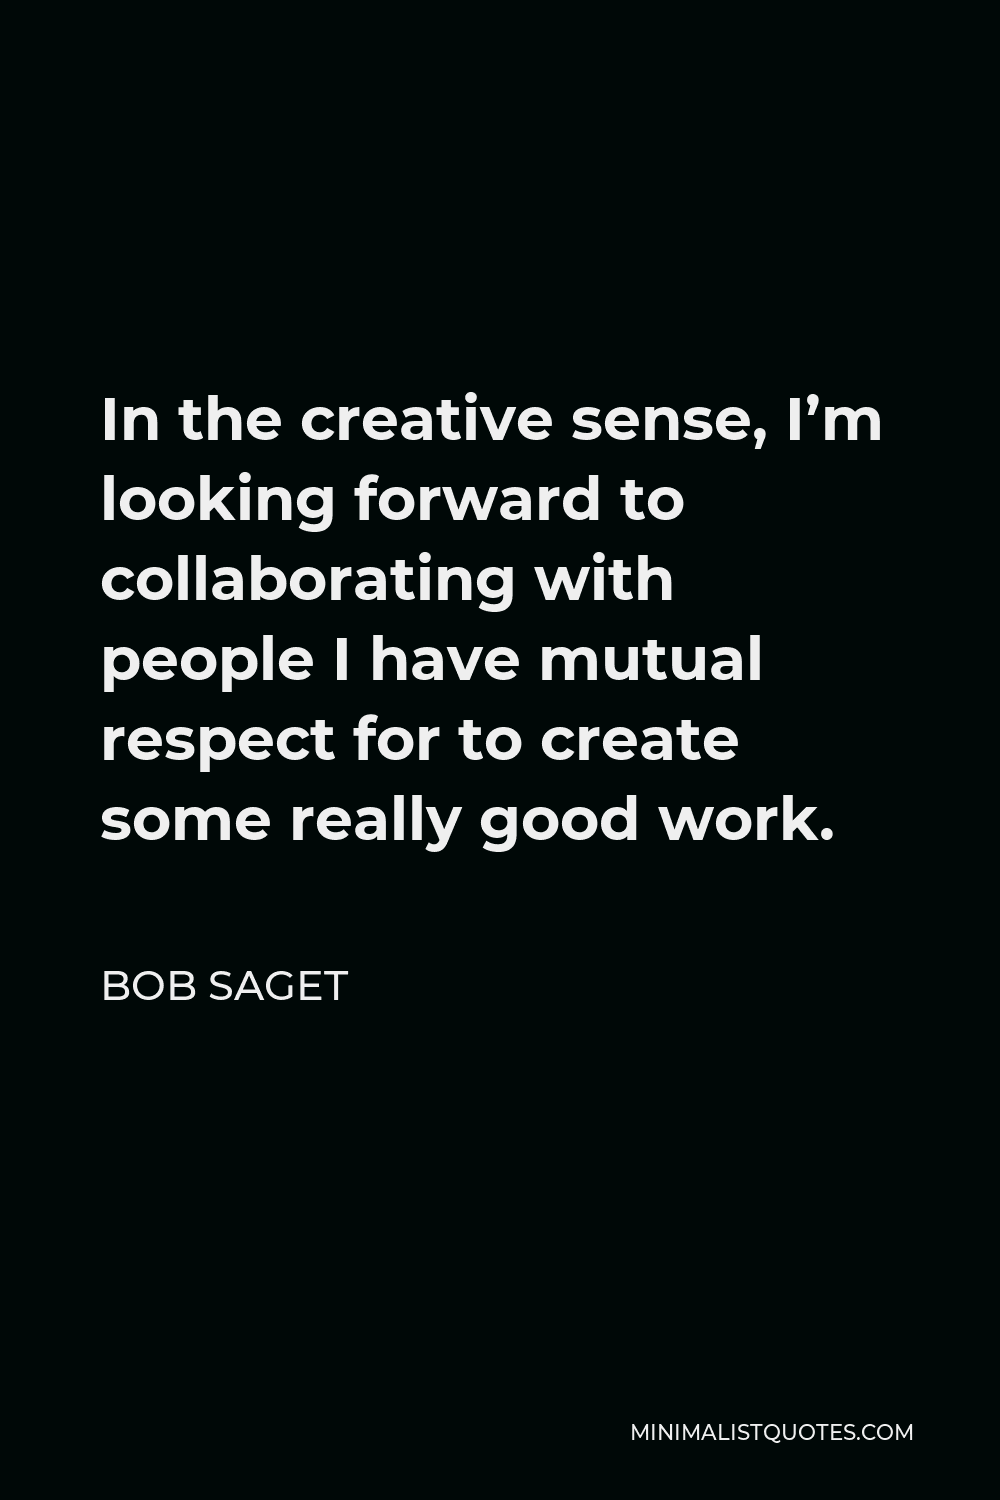 Bob Saget Quote - In the creative sense, I’m looking forward to collaborating with people I have mutual respect for to create some really good work.